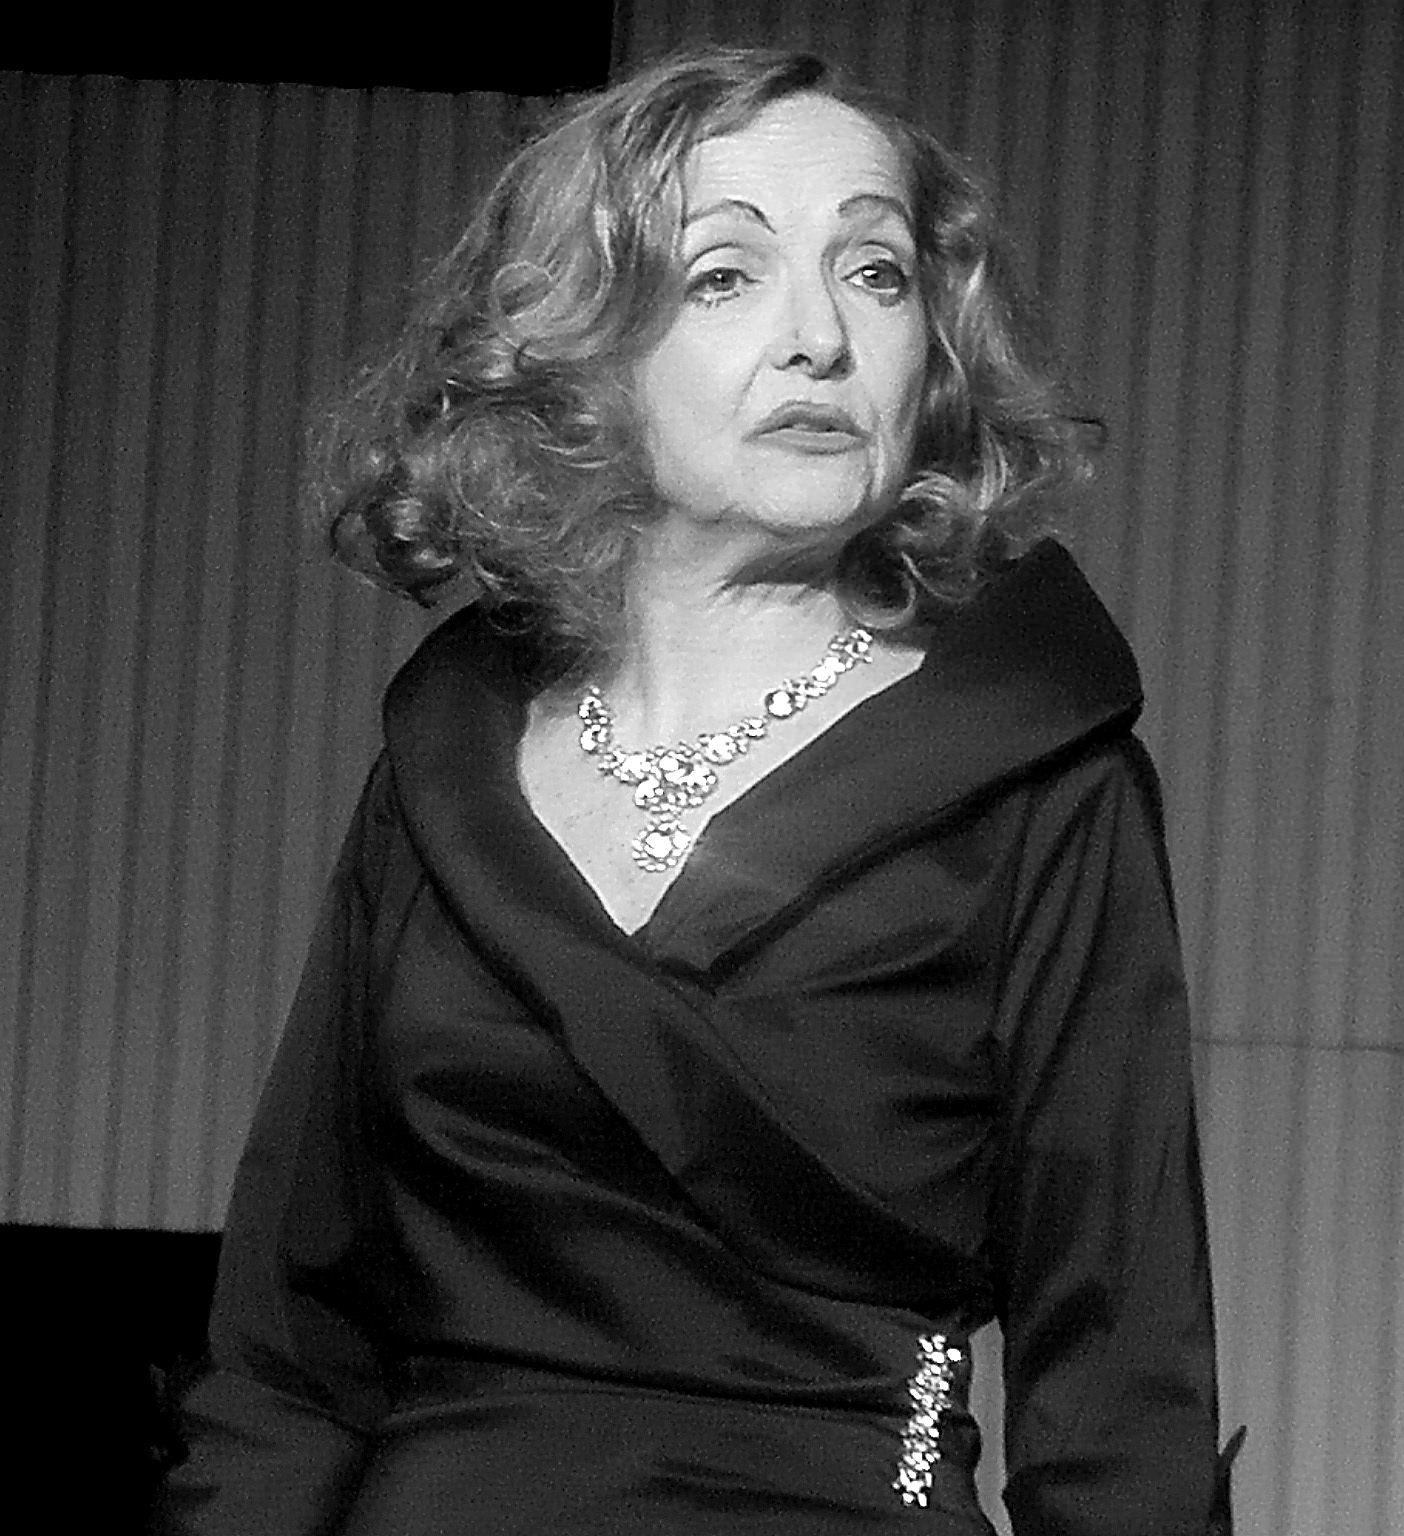 Christine St. John stars in 'Bette Davis On The Edge' at Canterbury Summer Theatre at the Mainstreet running July 29-August 1